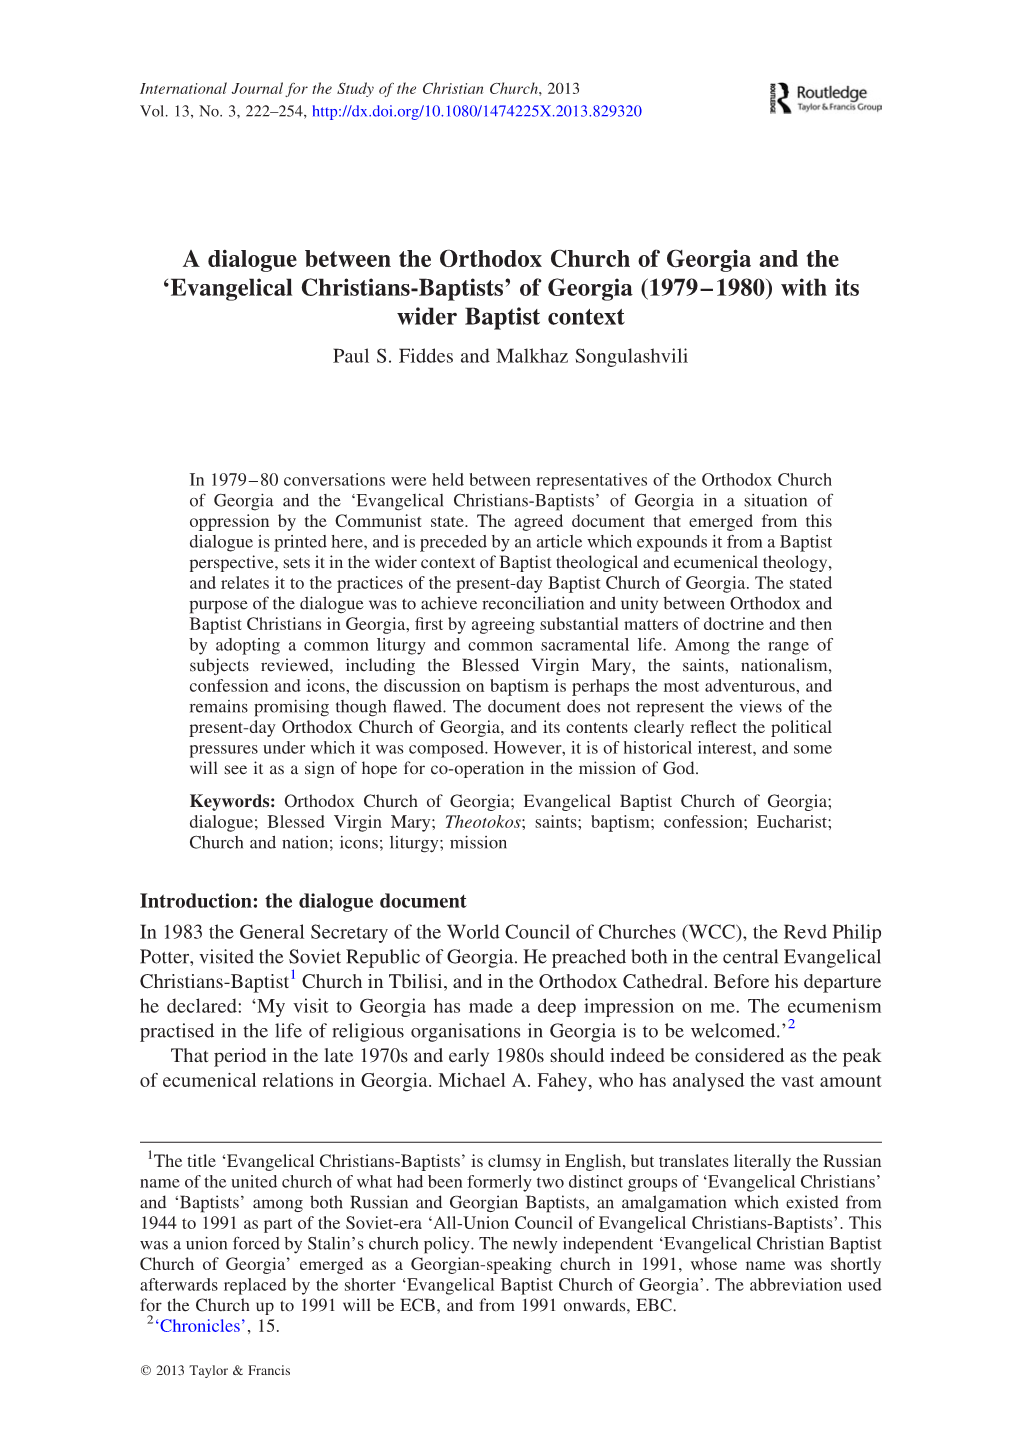 A Dialogue Between the Orthodox Church of Georgia and the ‘Evangelical Christians-Baptists’ of Georgia (1979–1980) with Its Wider Baptist Context Paul S